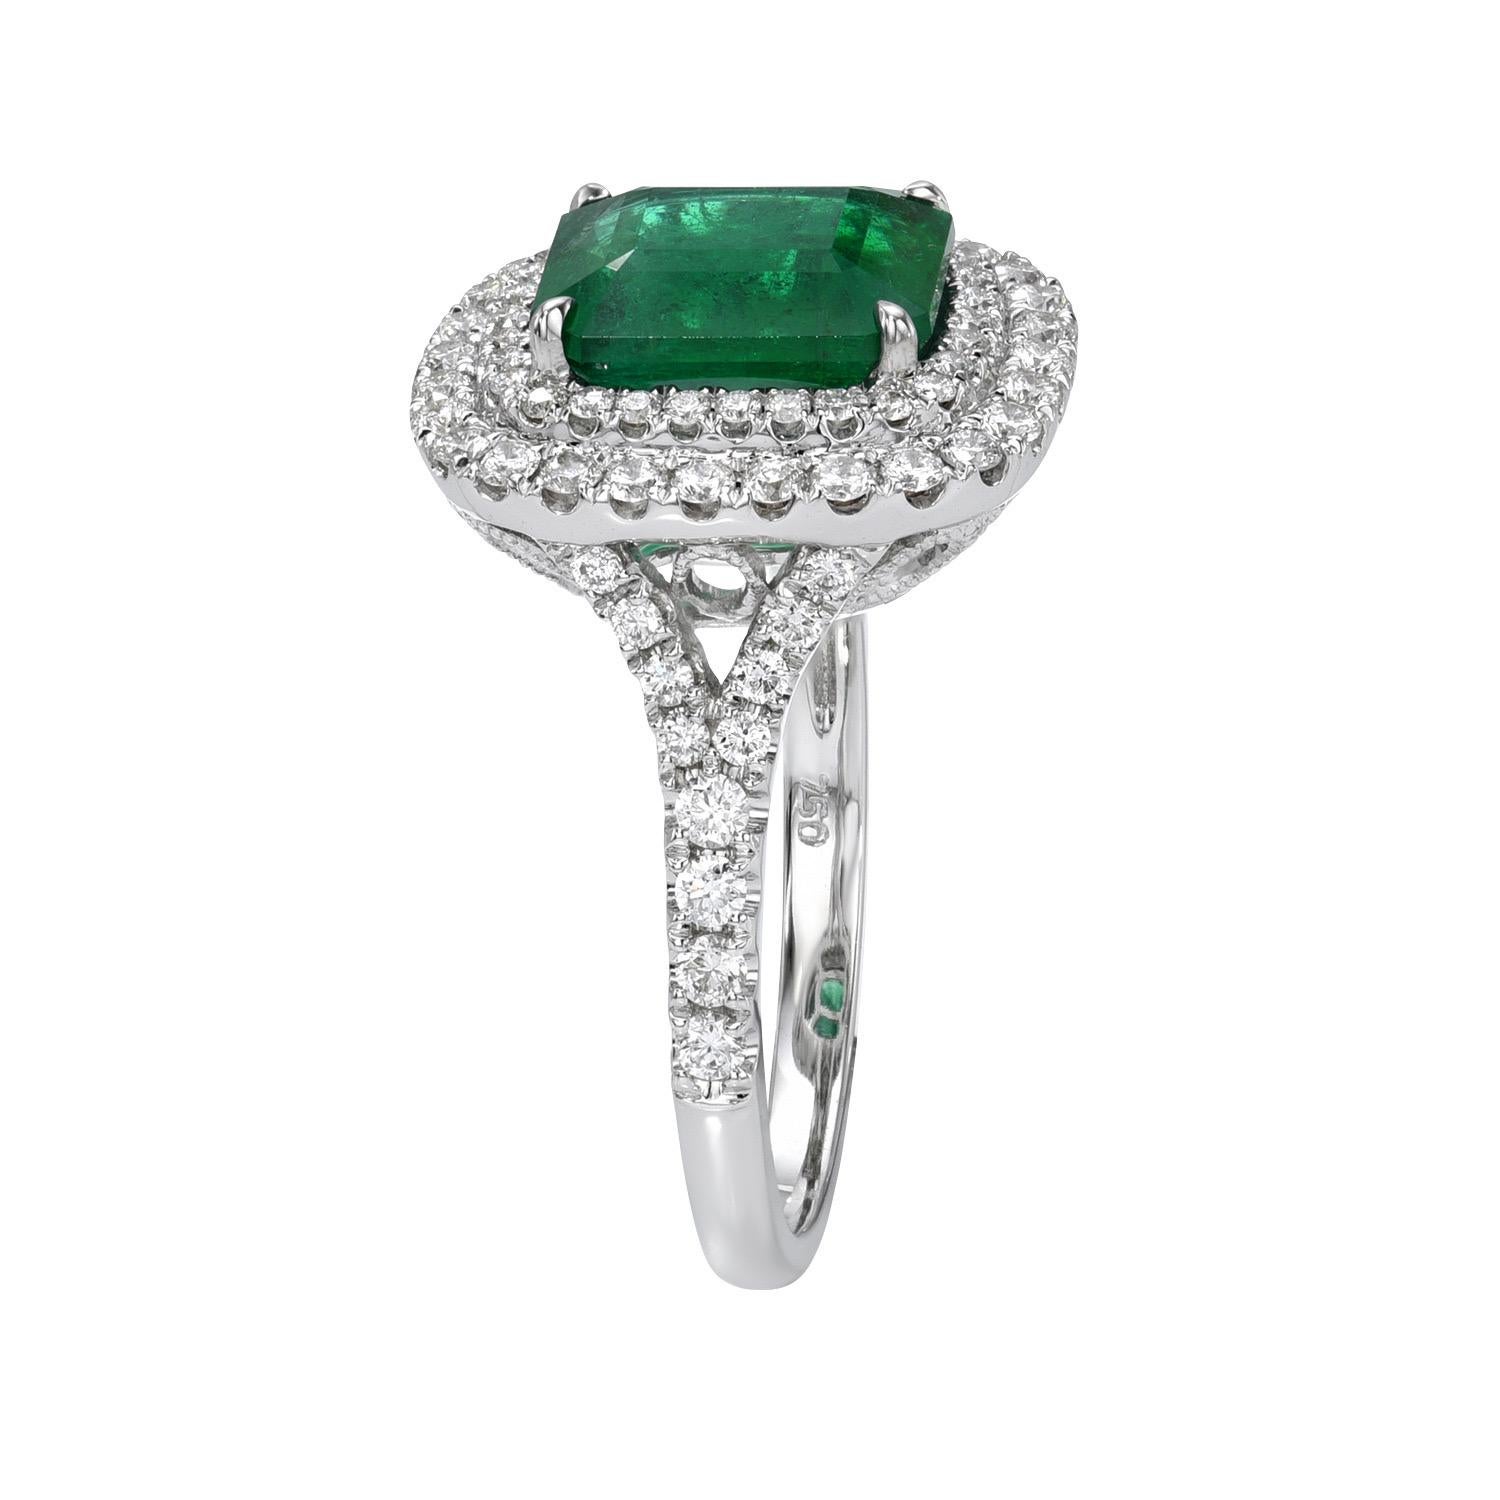 Contemporary Emerald Ring Emerald Cut 2.88 Carats For Sale